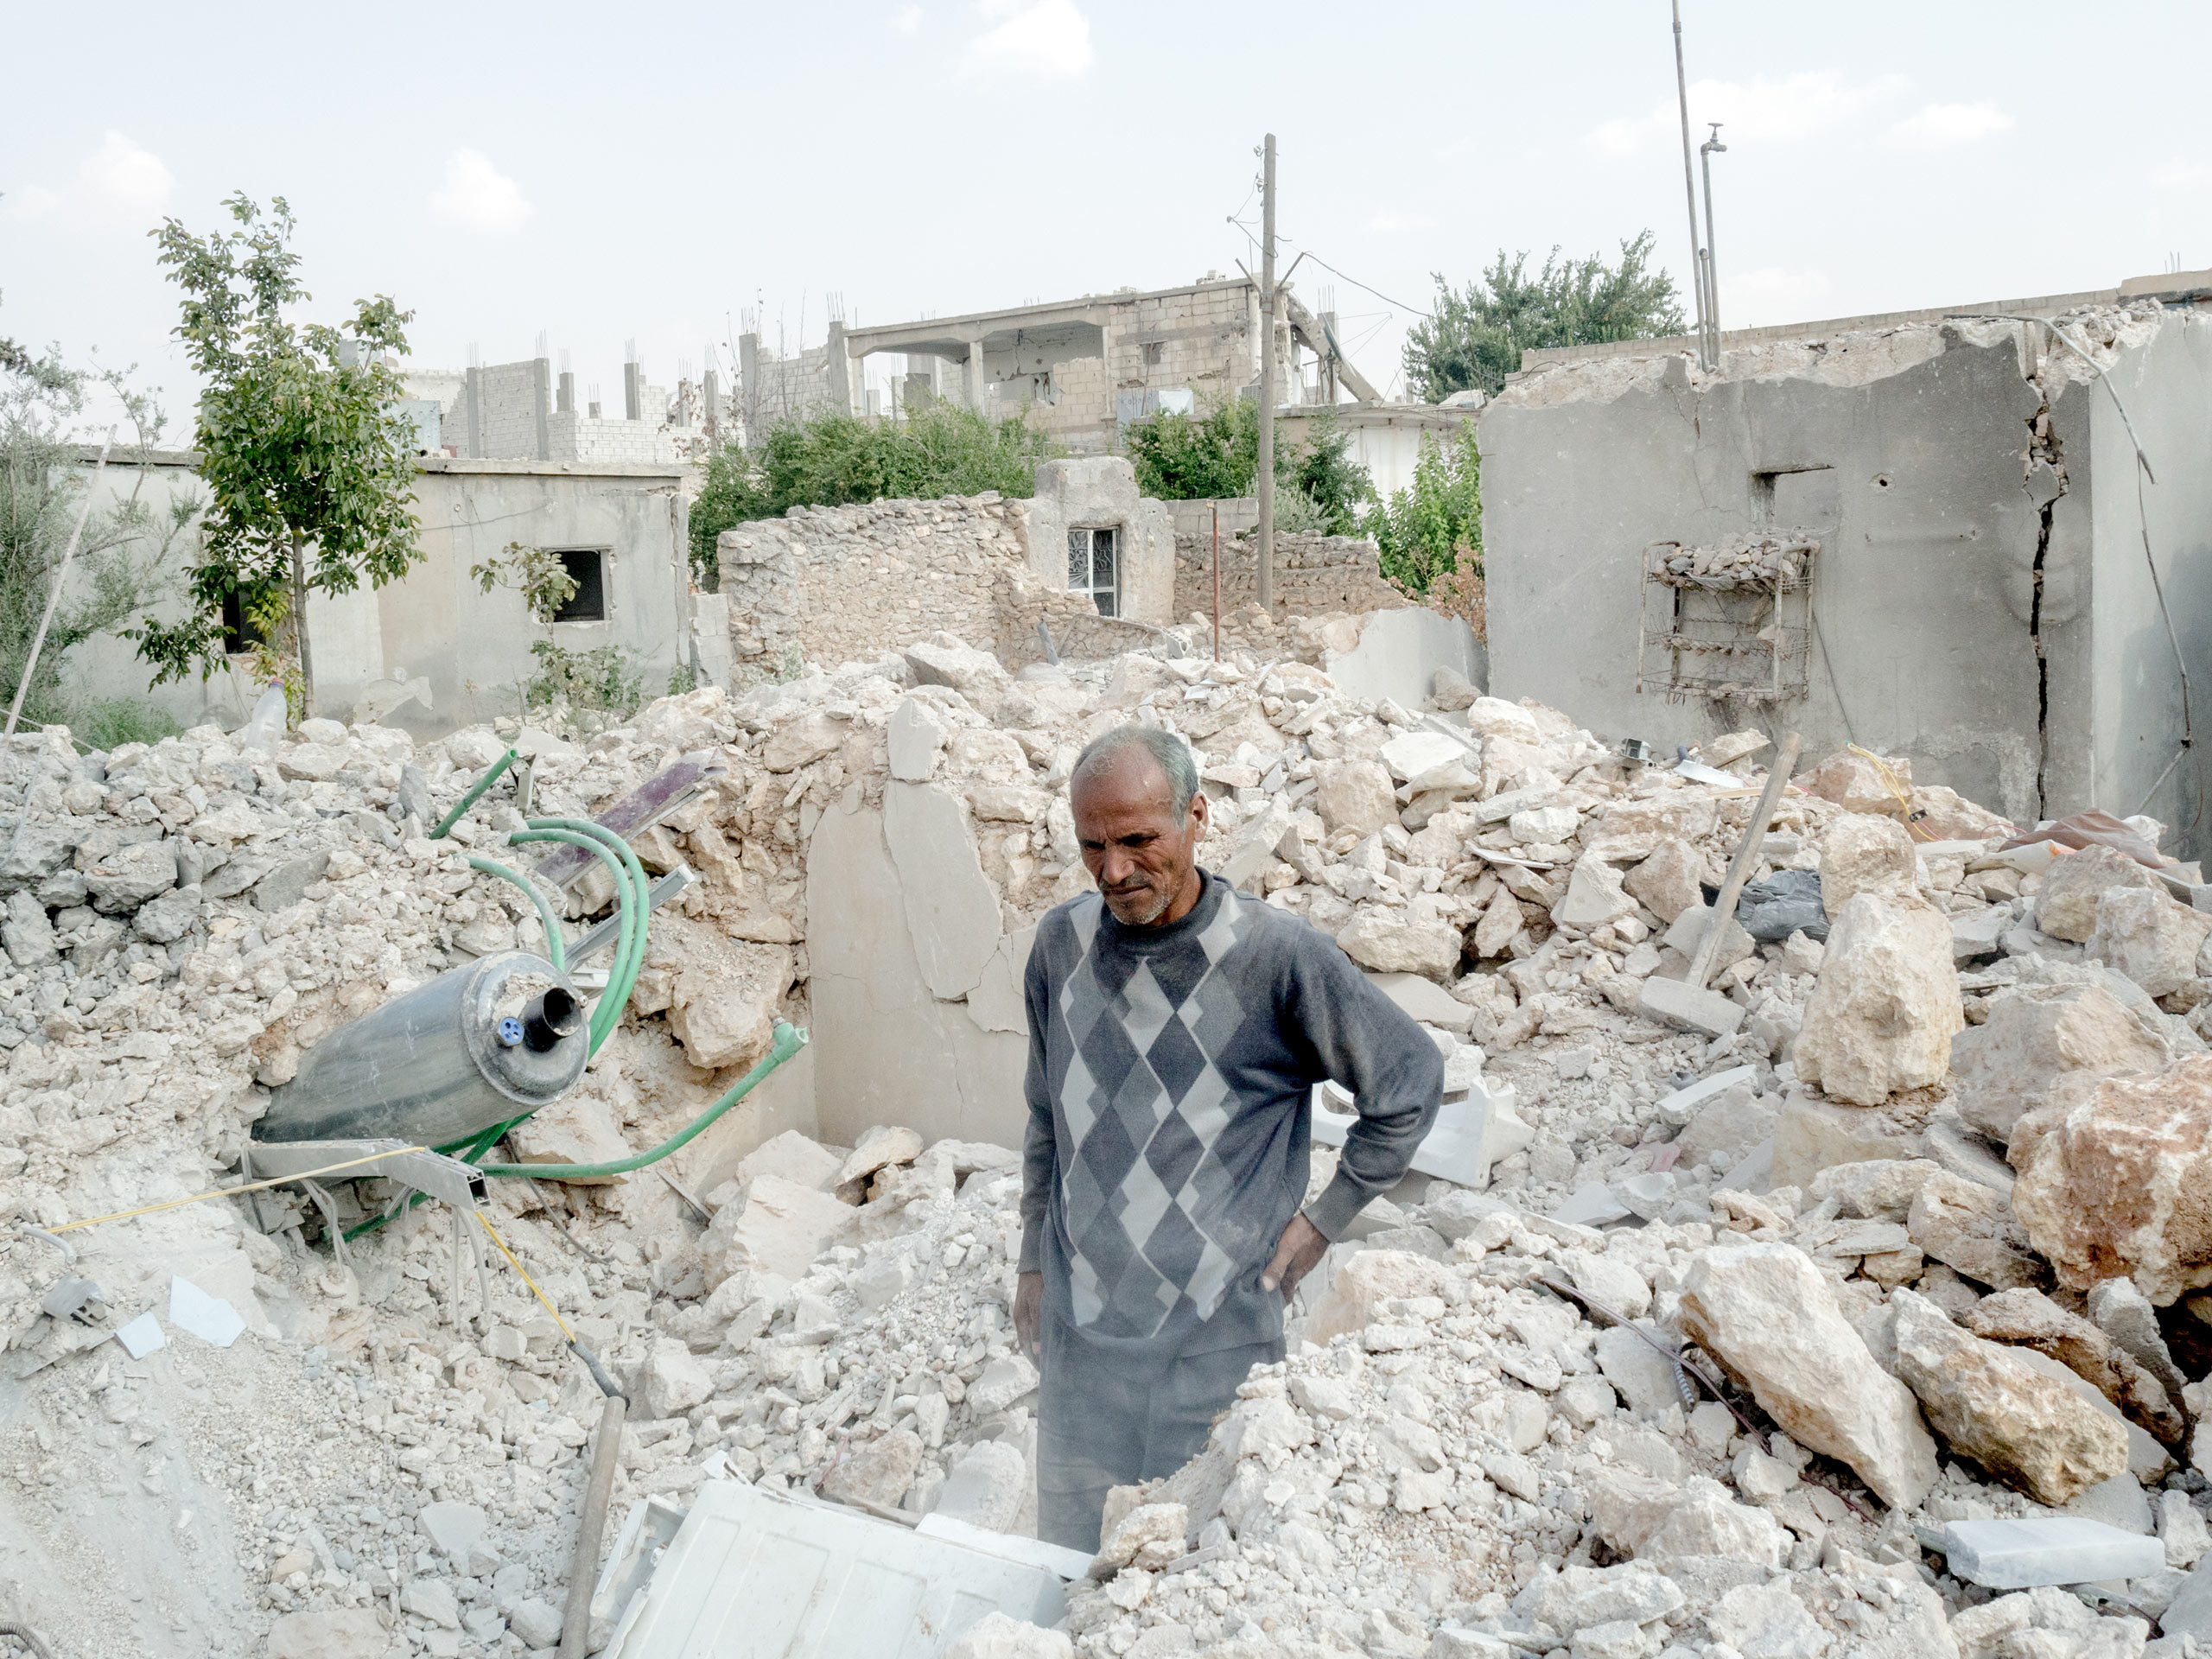 A man is seen trying to recover objects between the rubble of his home. Kobani, Syria. Aug. 7, 2015.